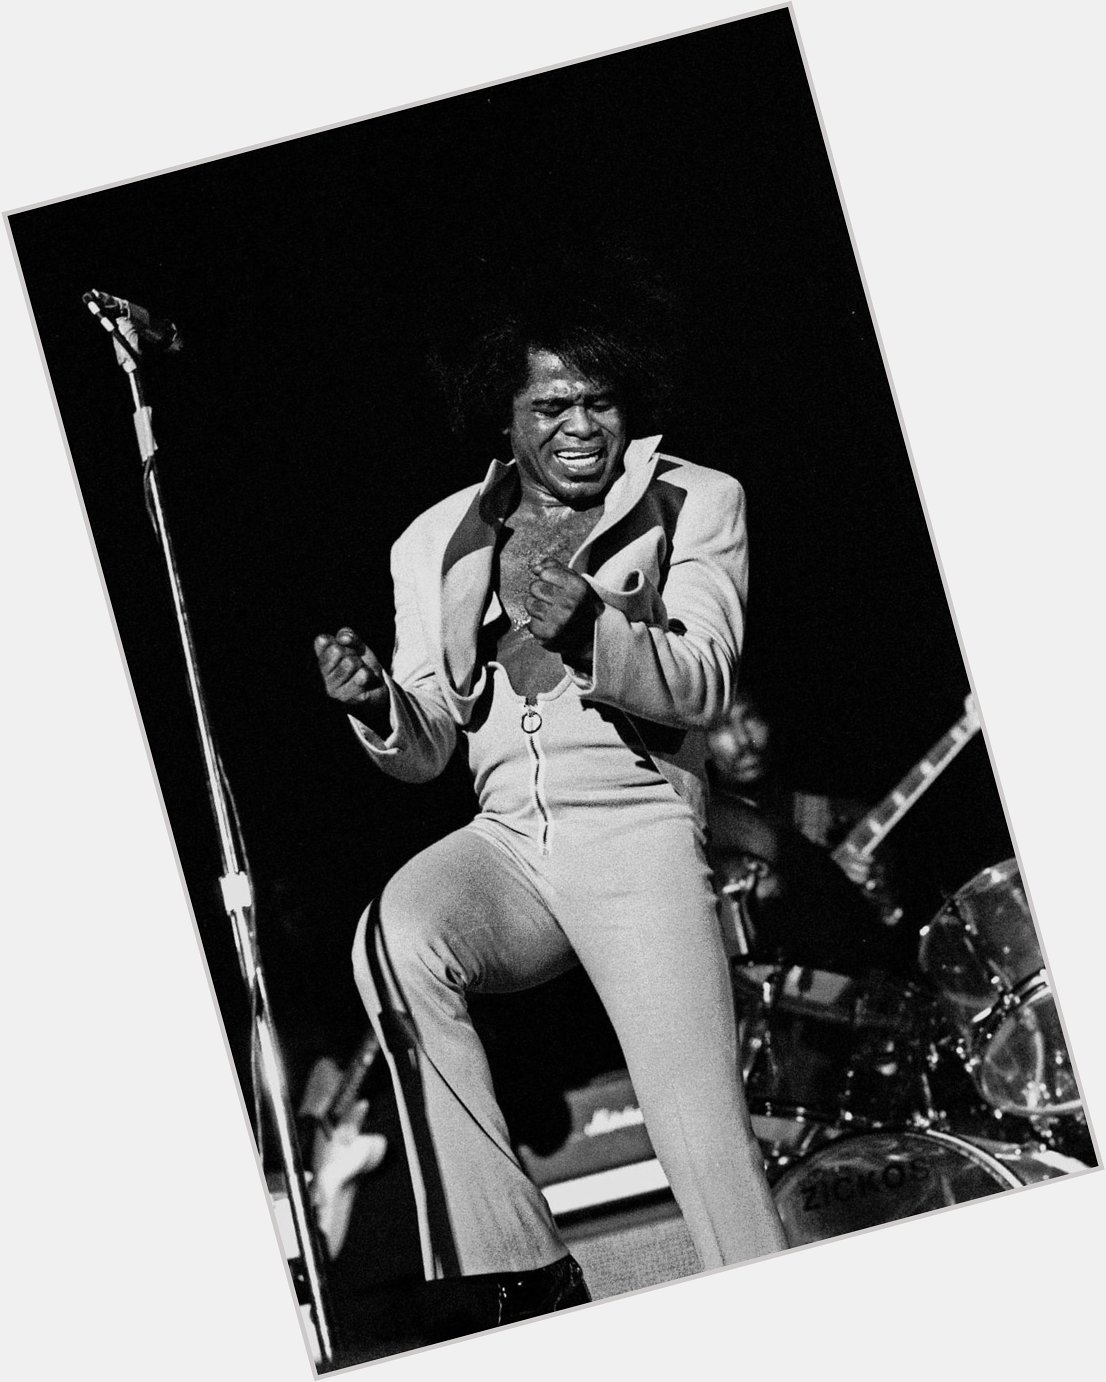 Forgot to post this, but happy birthday to the funkiest man to ever do it, James Brown. 